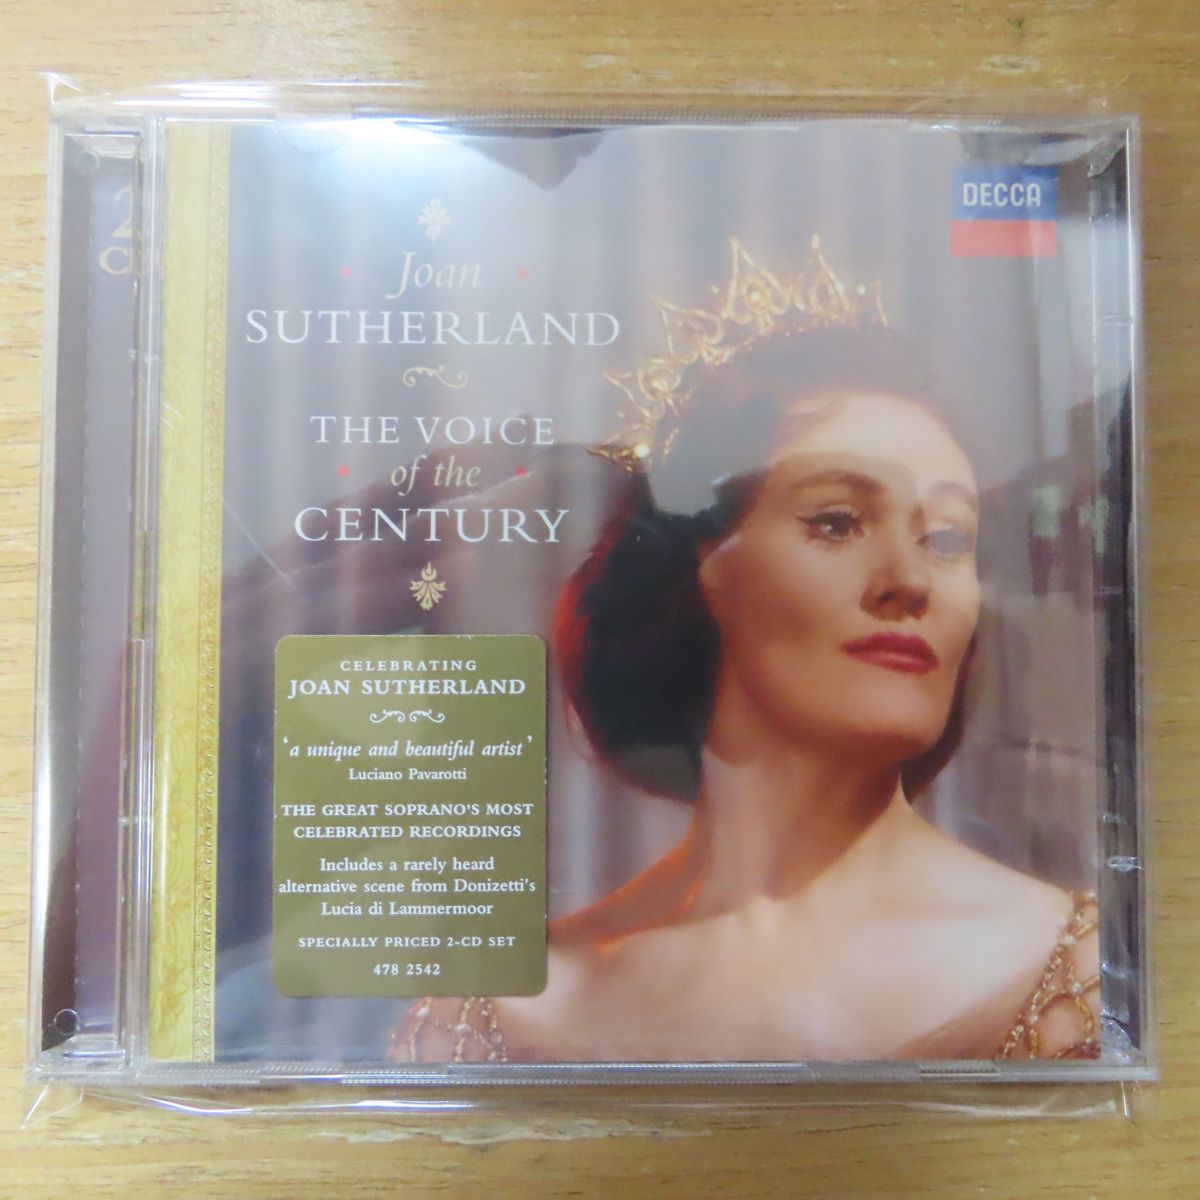 The Voice of the Century Joan Sutherland